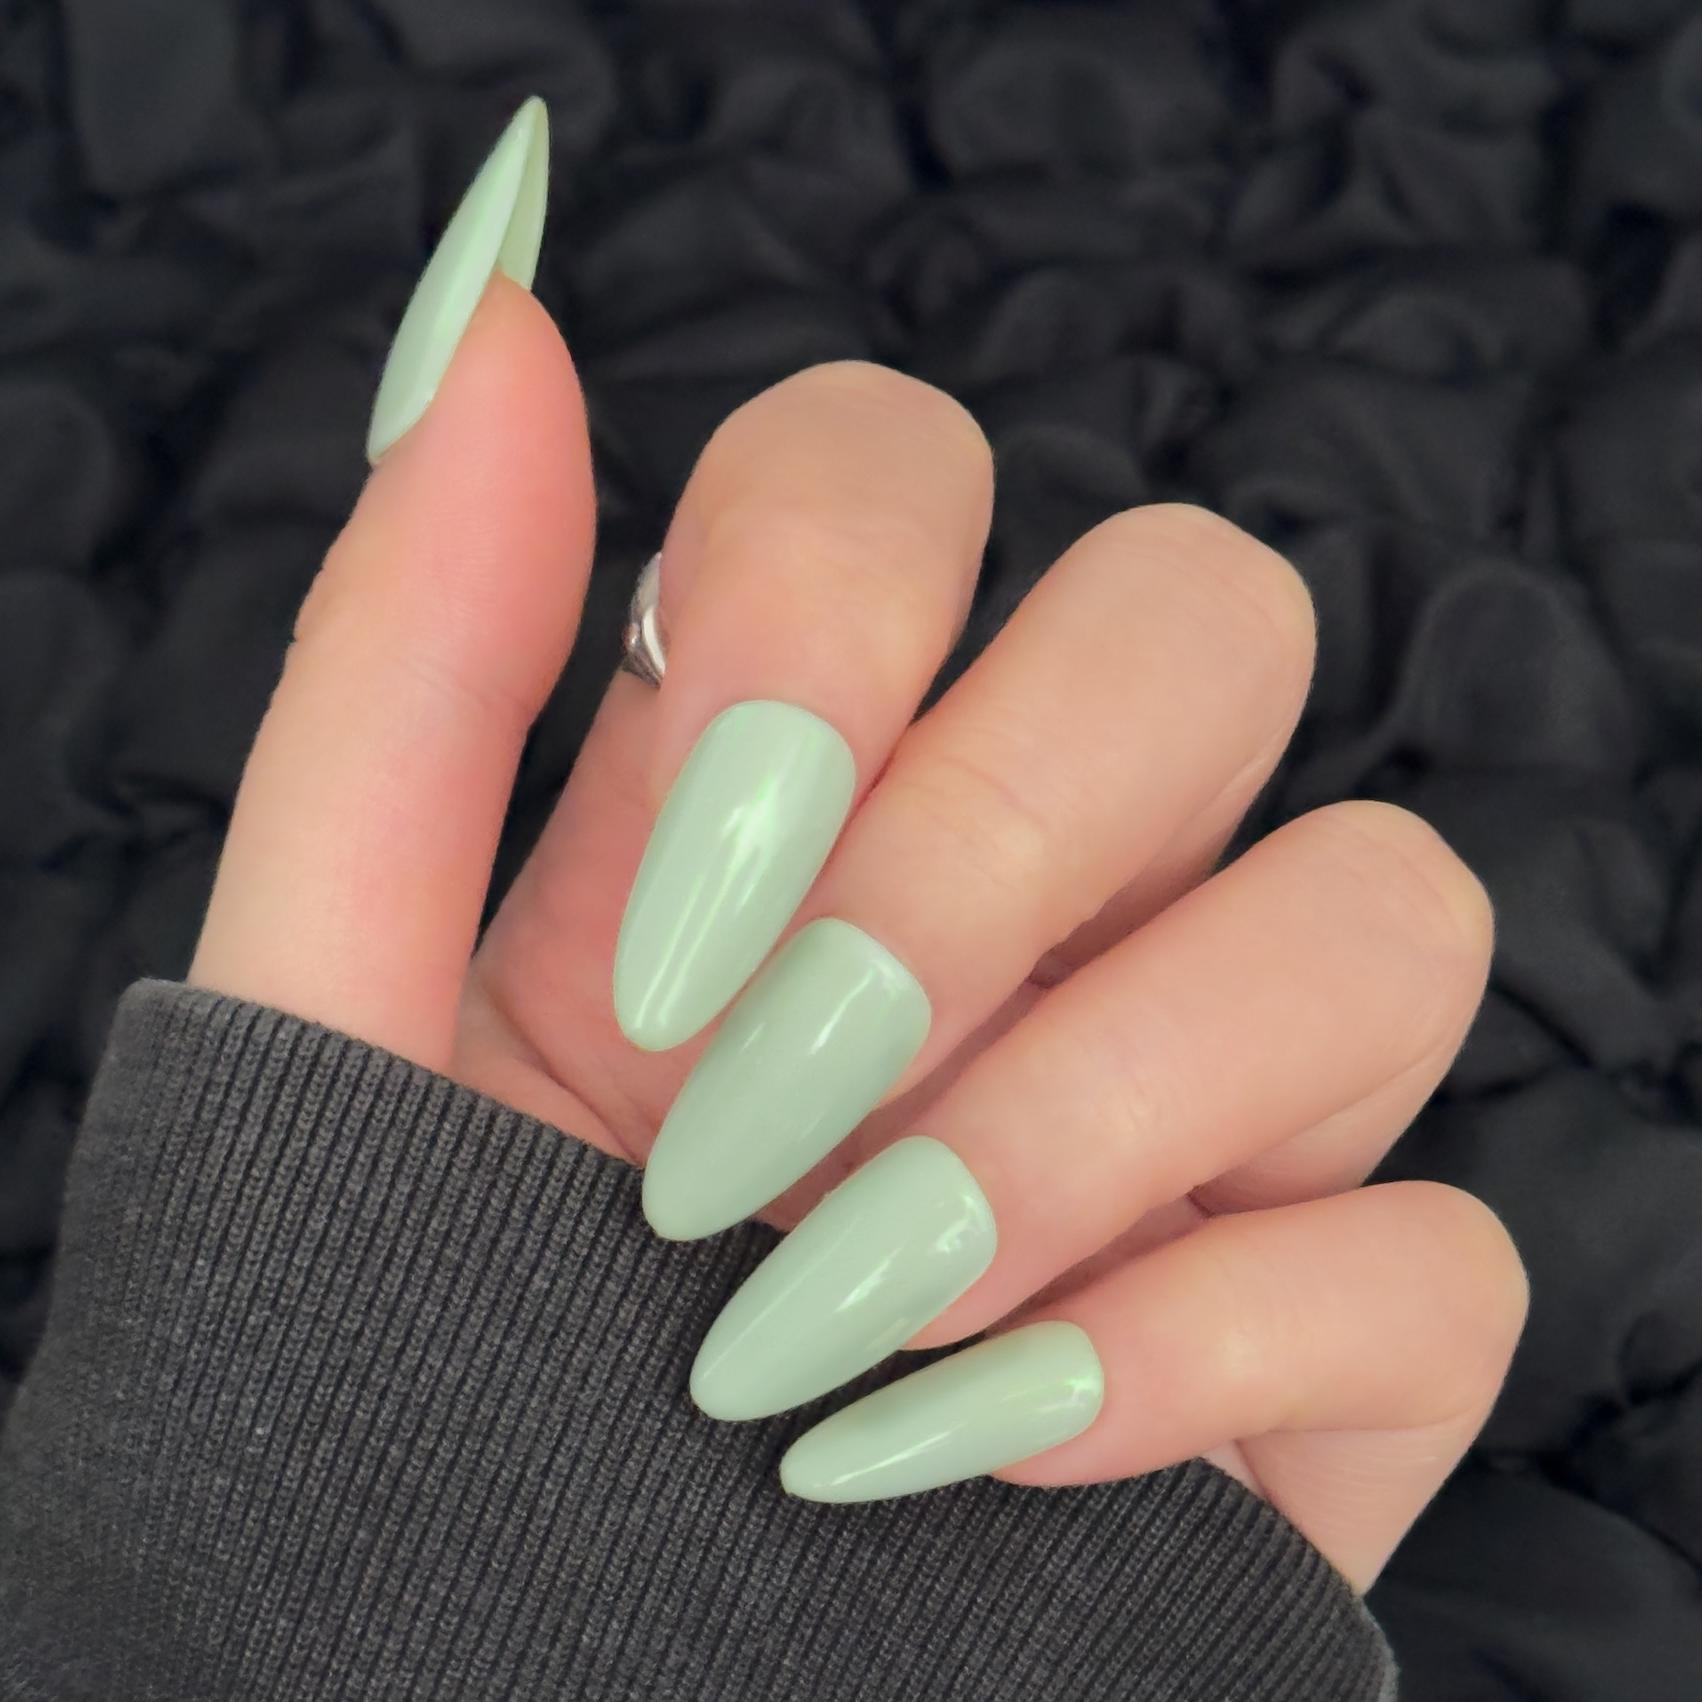 Close-up of a hand wearing MyLilith's mint green press-on nails with a glossy and glazed finish, in an oval shape.